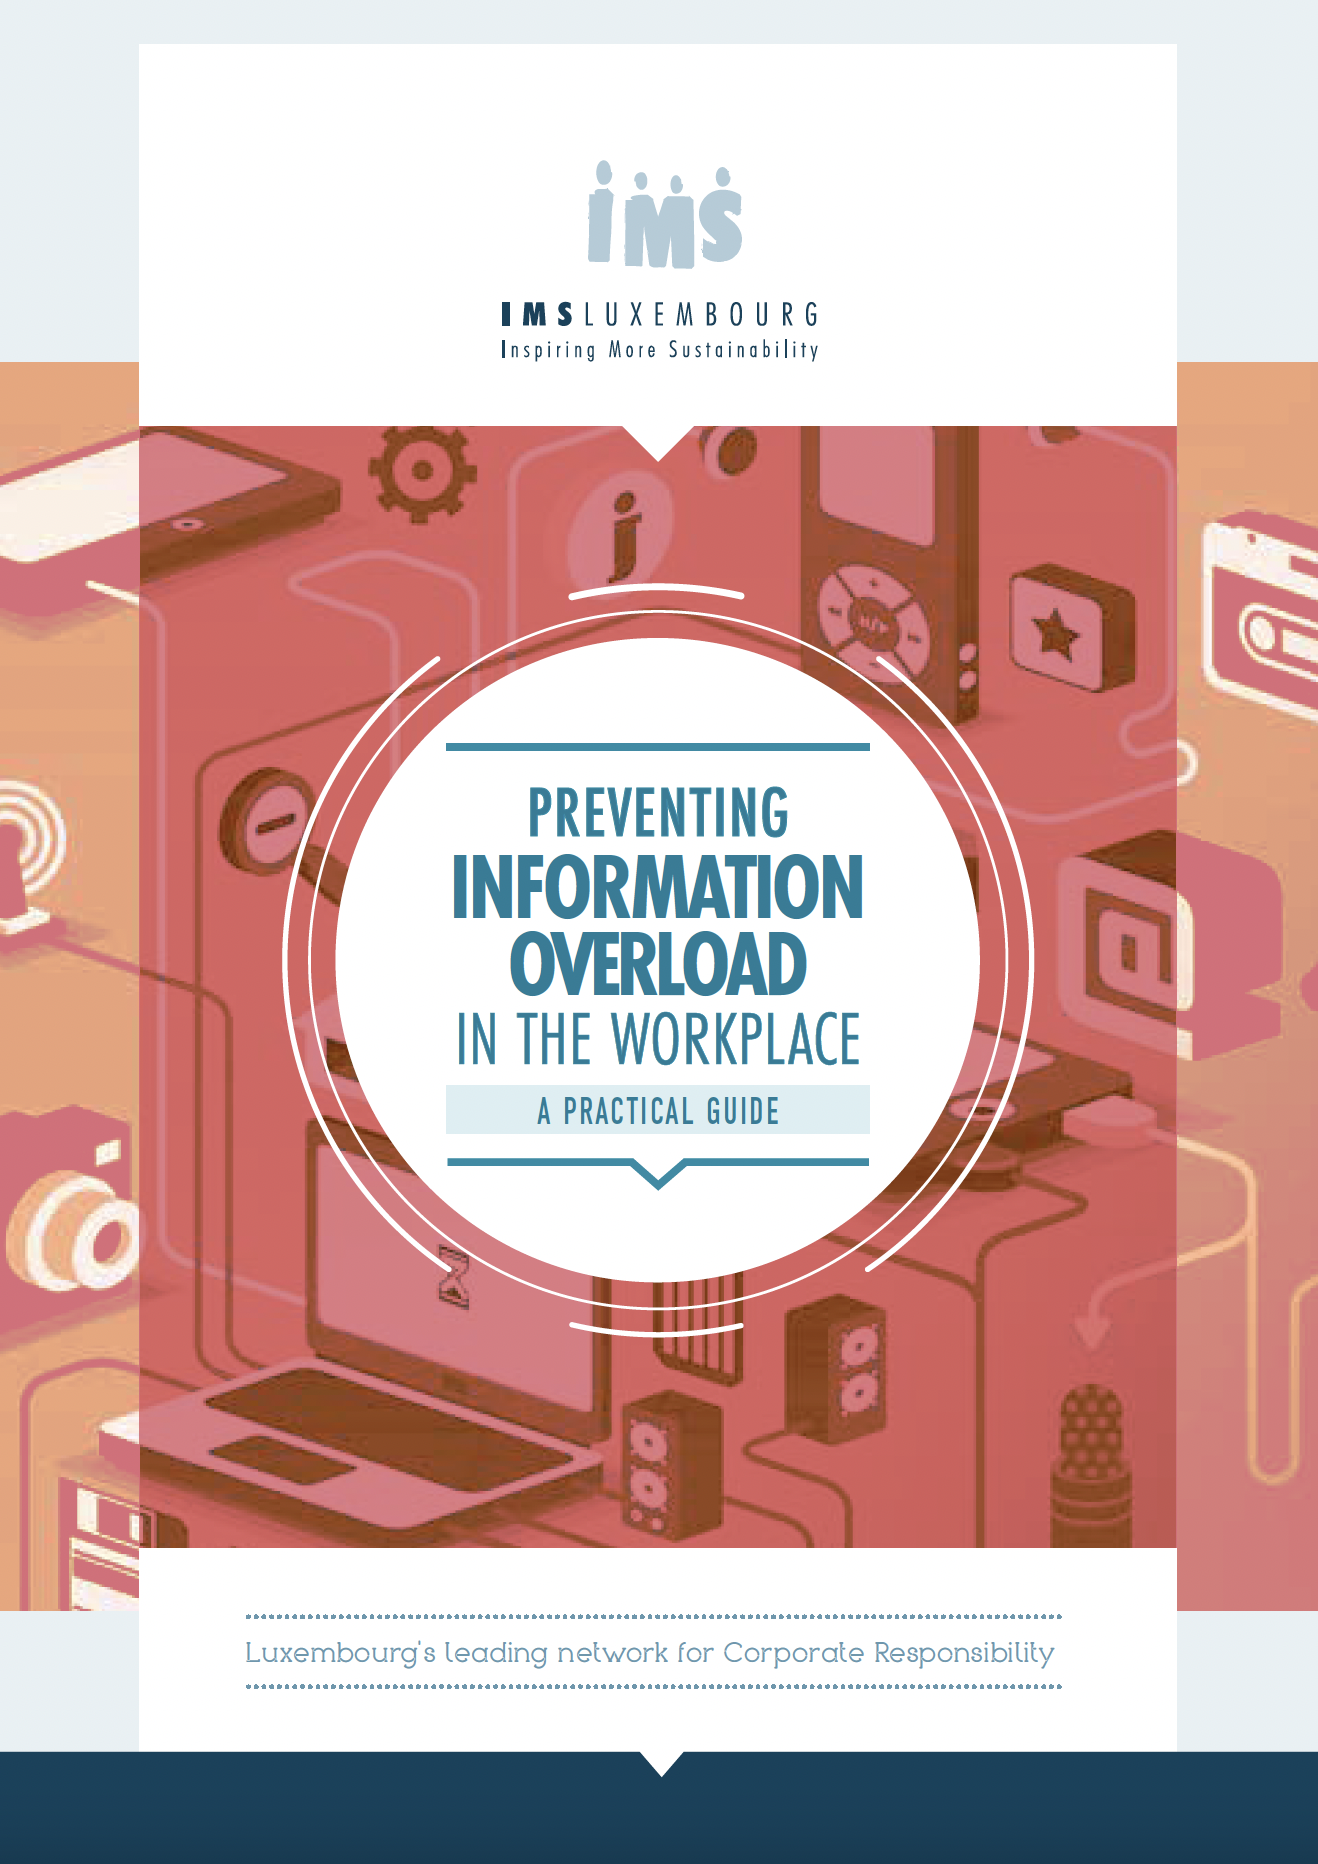 Information overload in the workplace